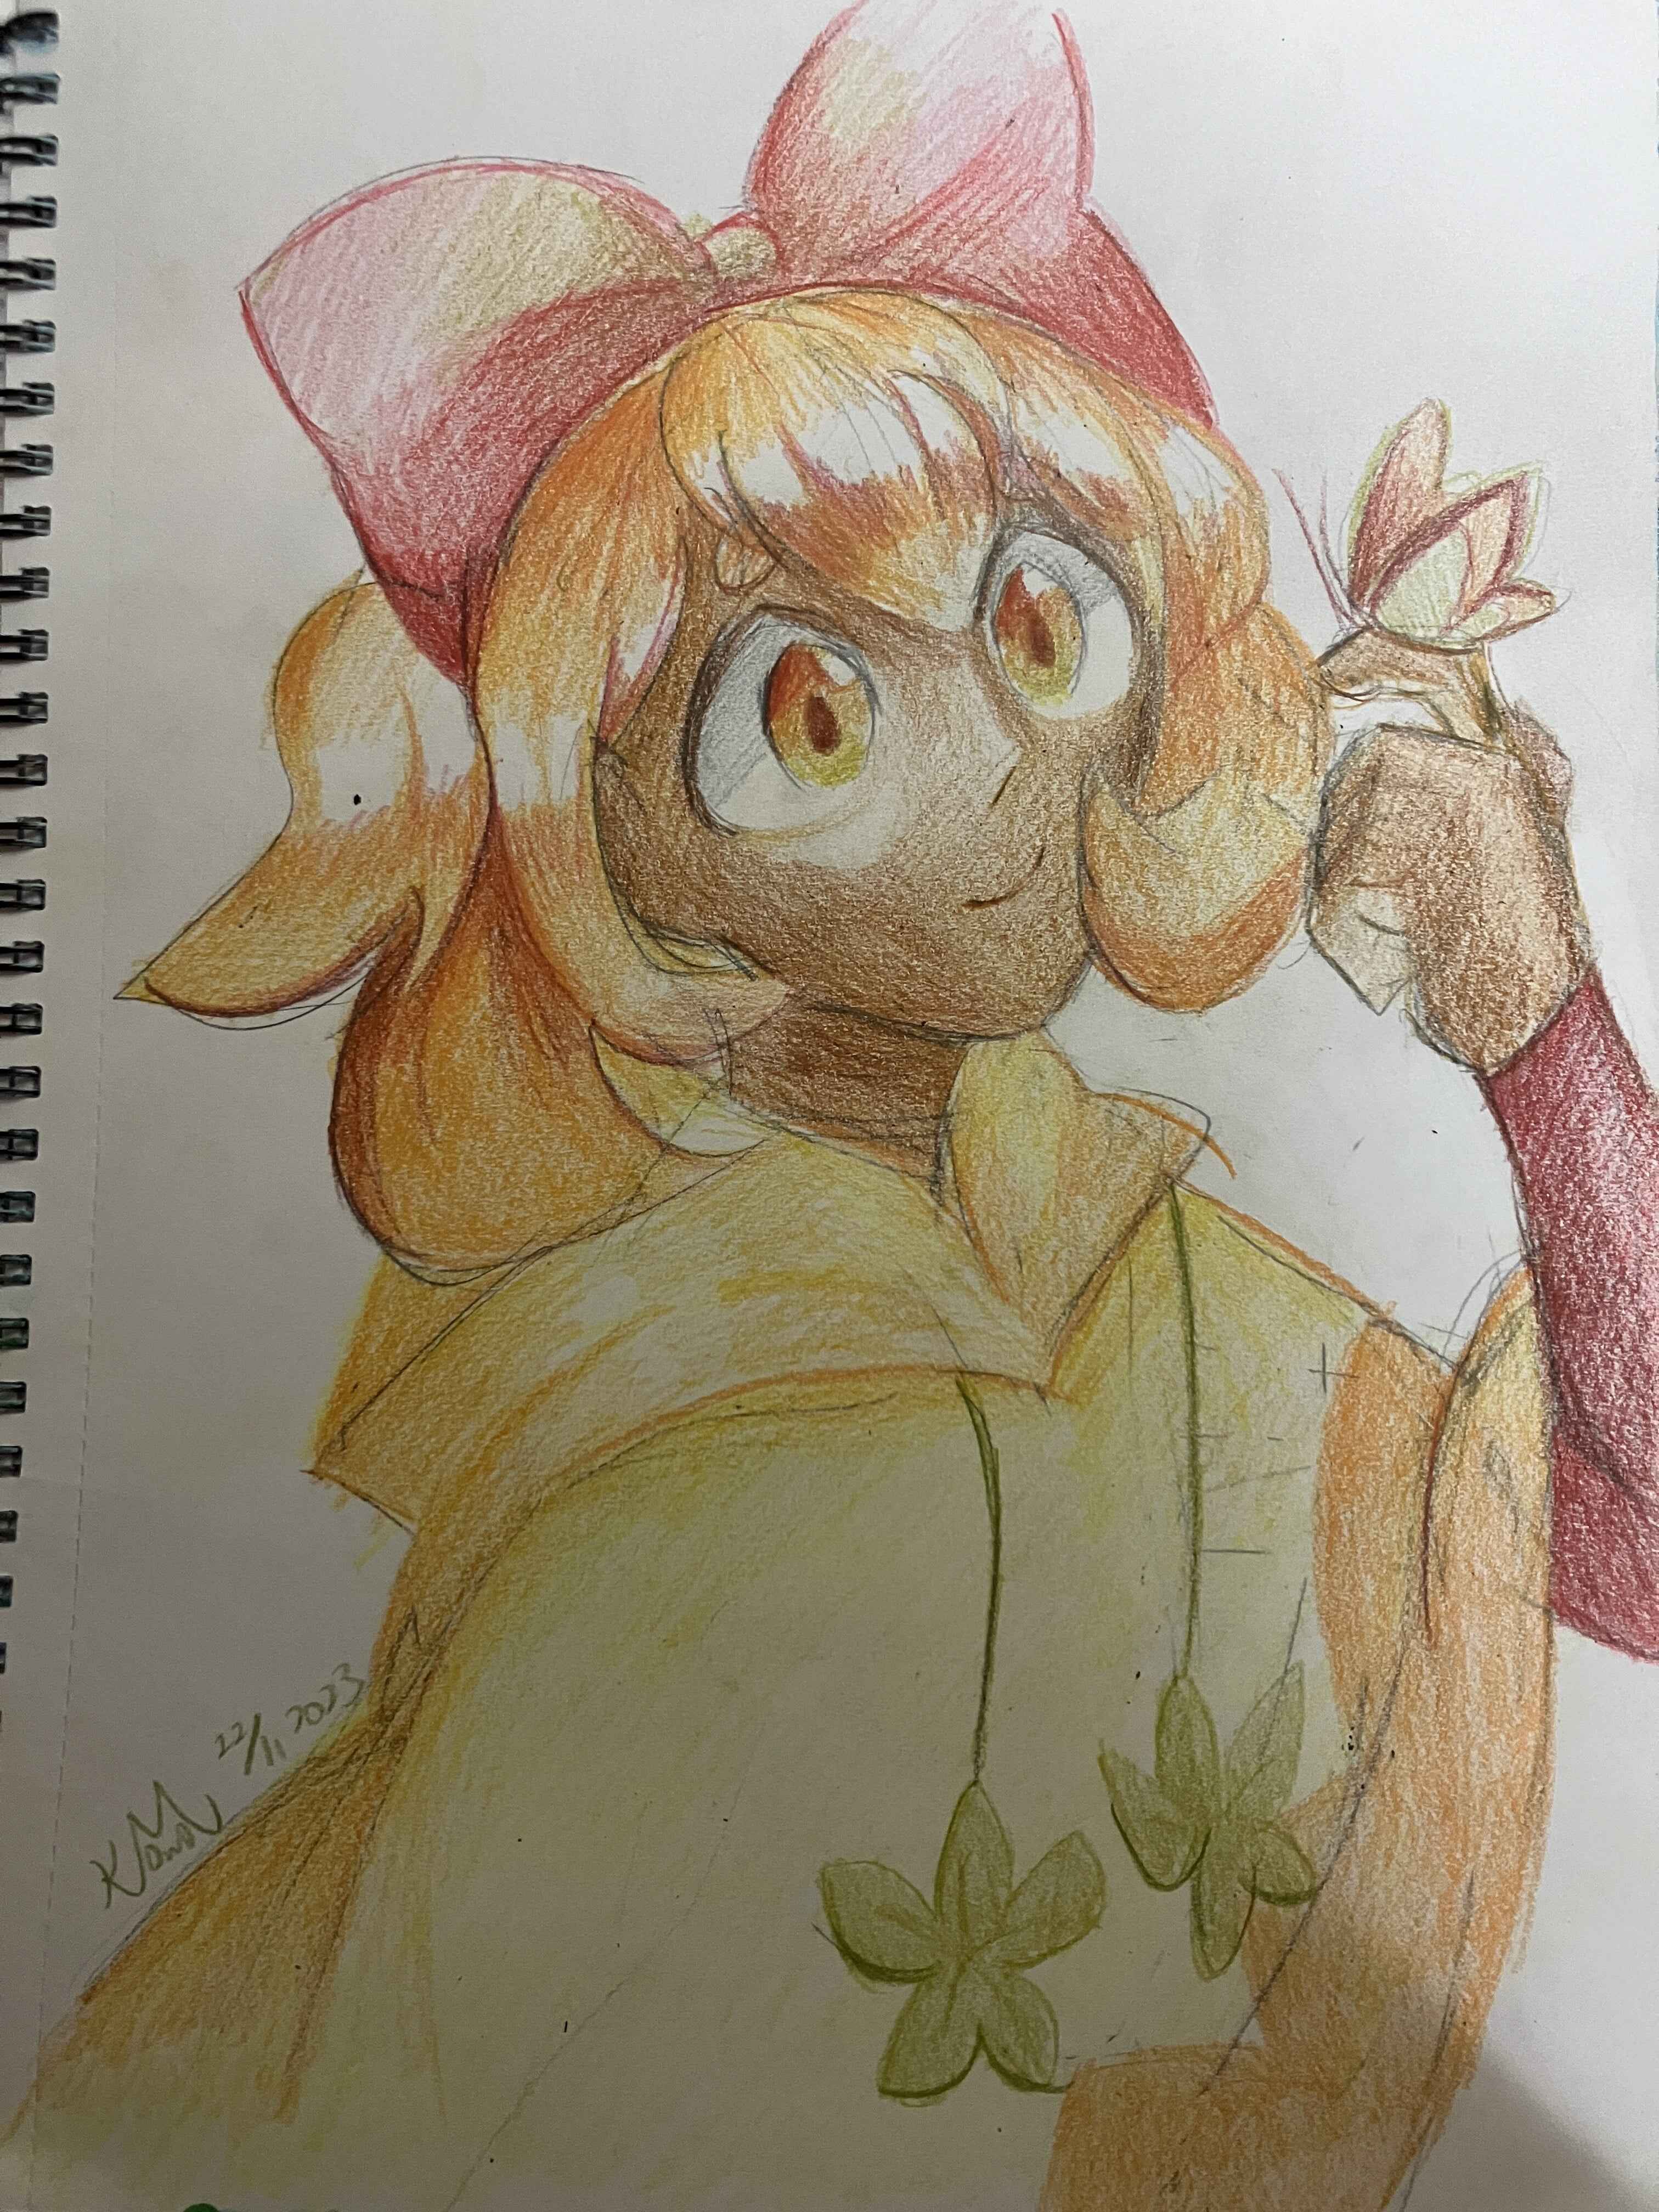 Colored pencil Ruth drawing